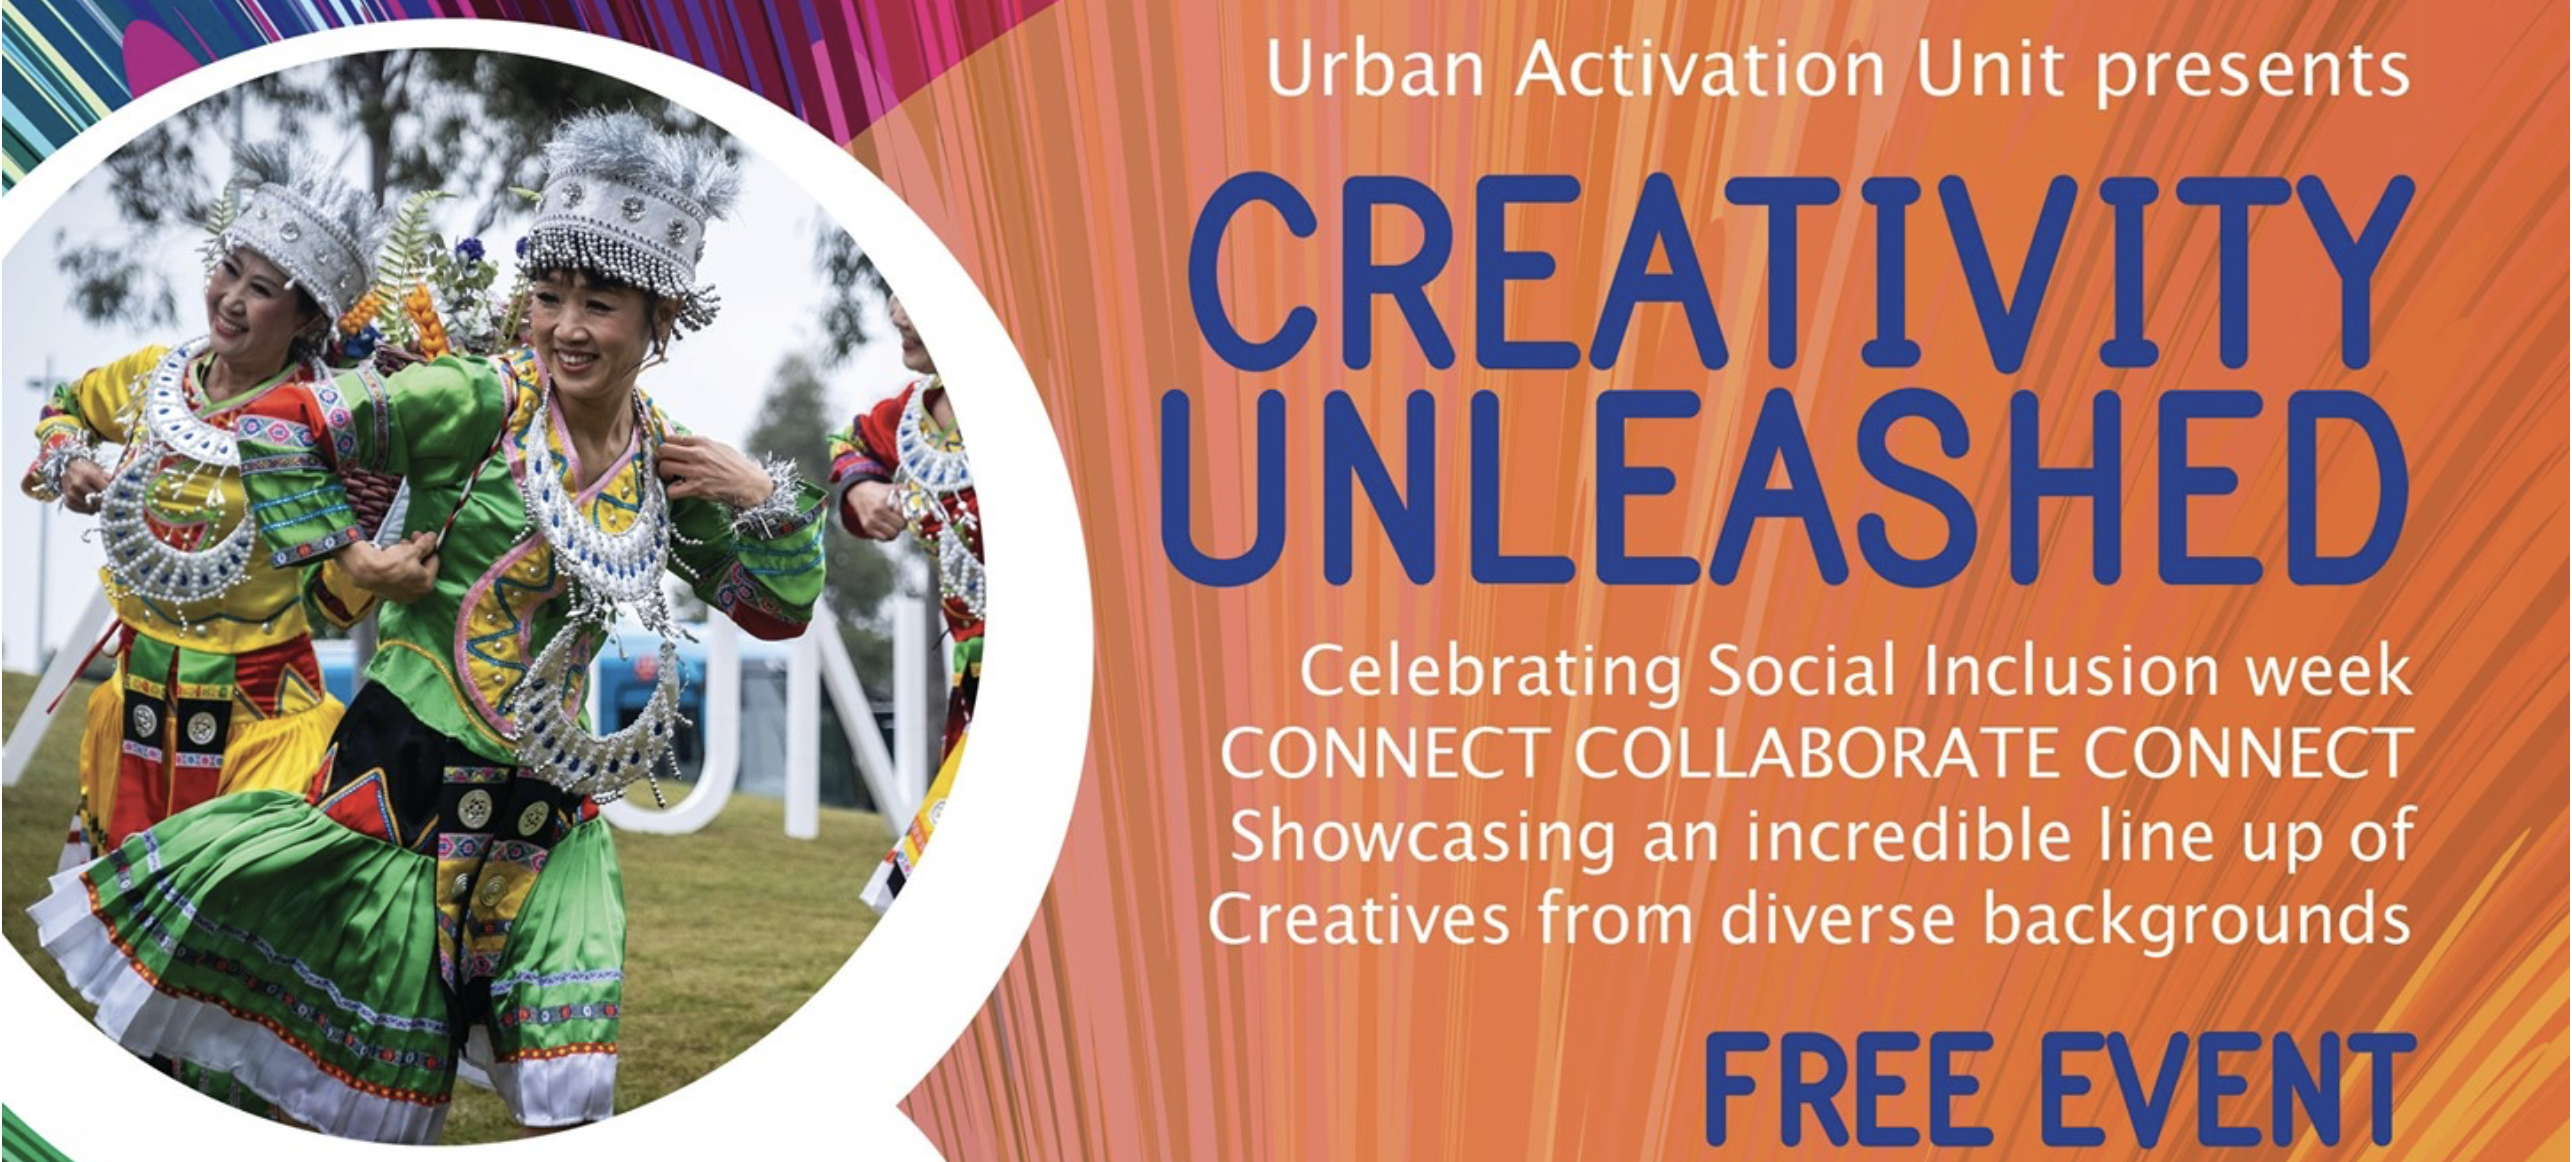 Creativity Unleashed Event, West Ryde PLAZA